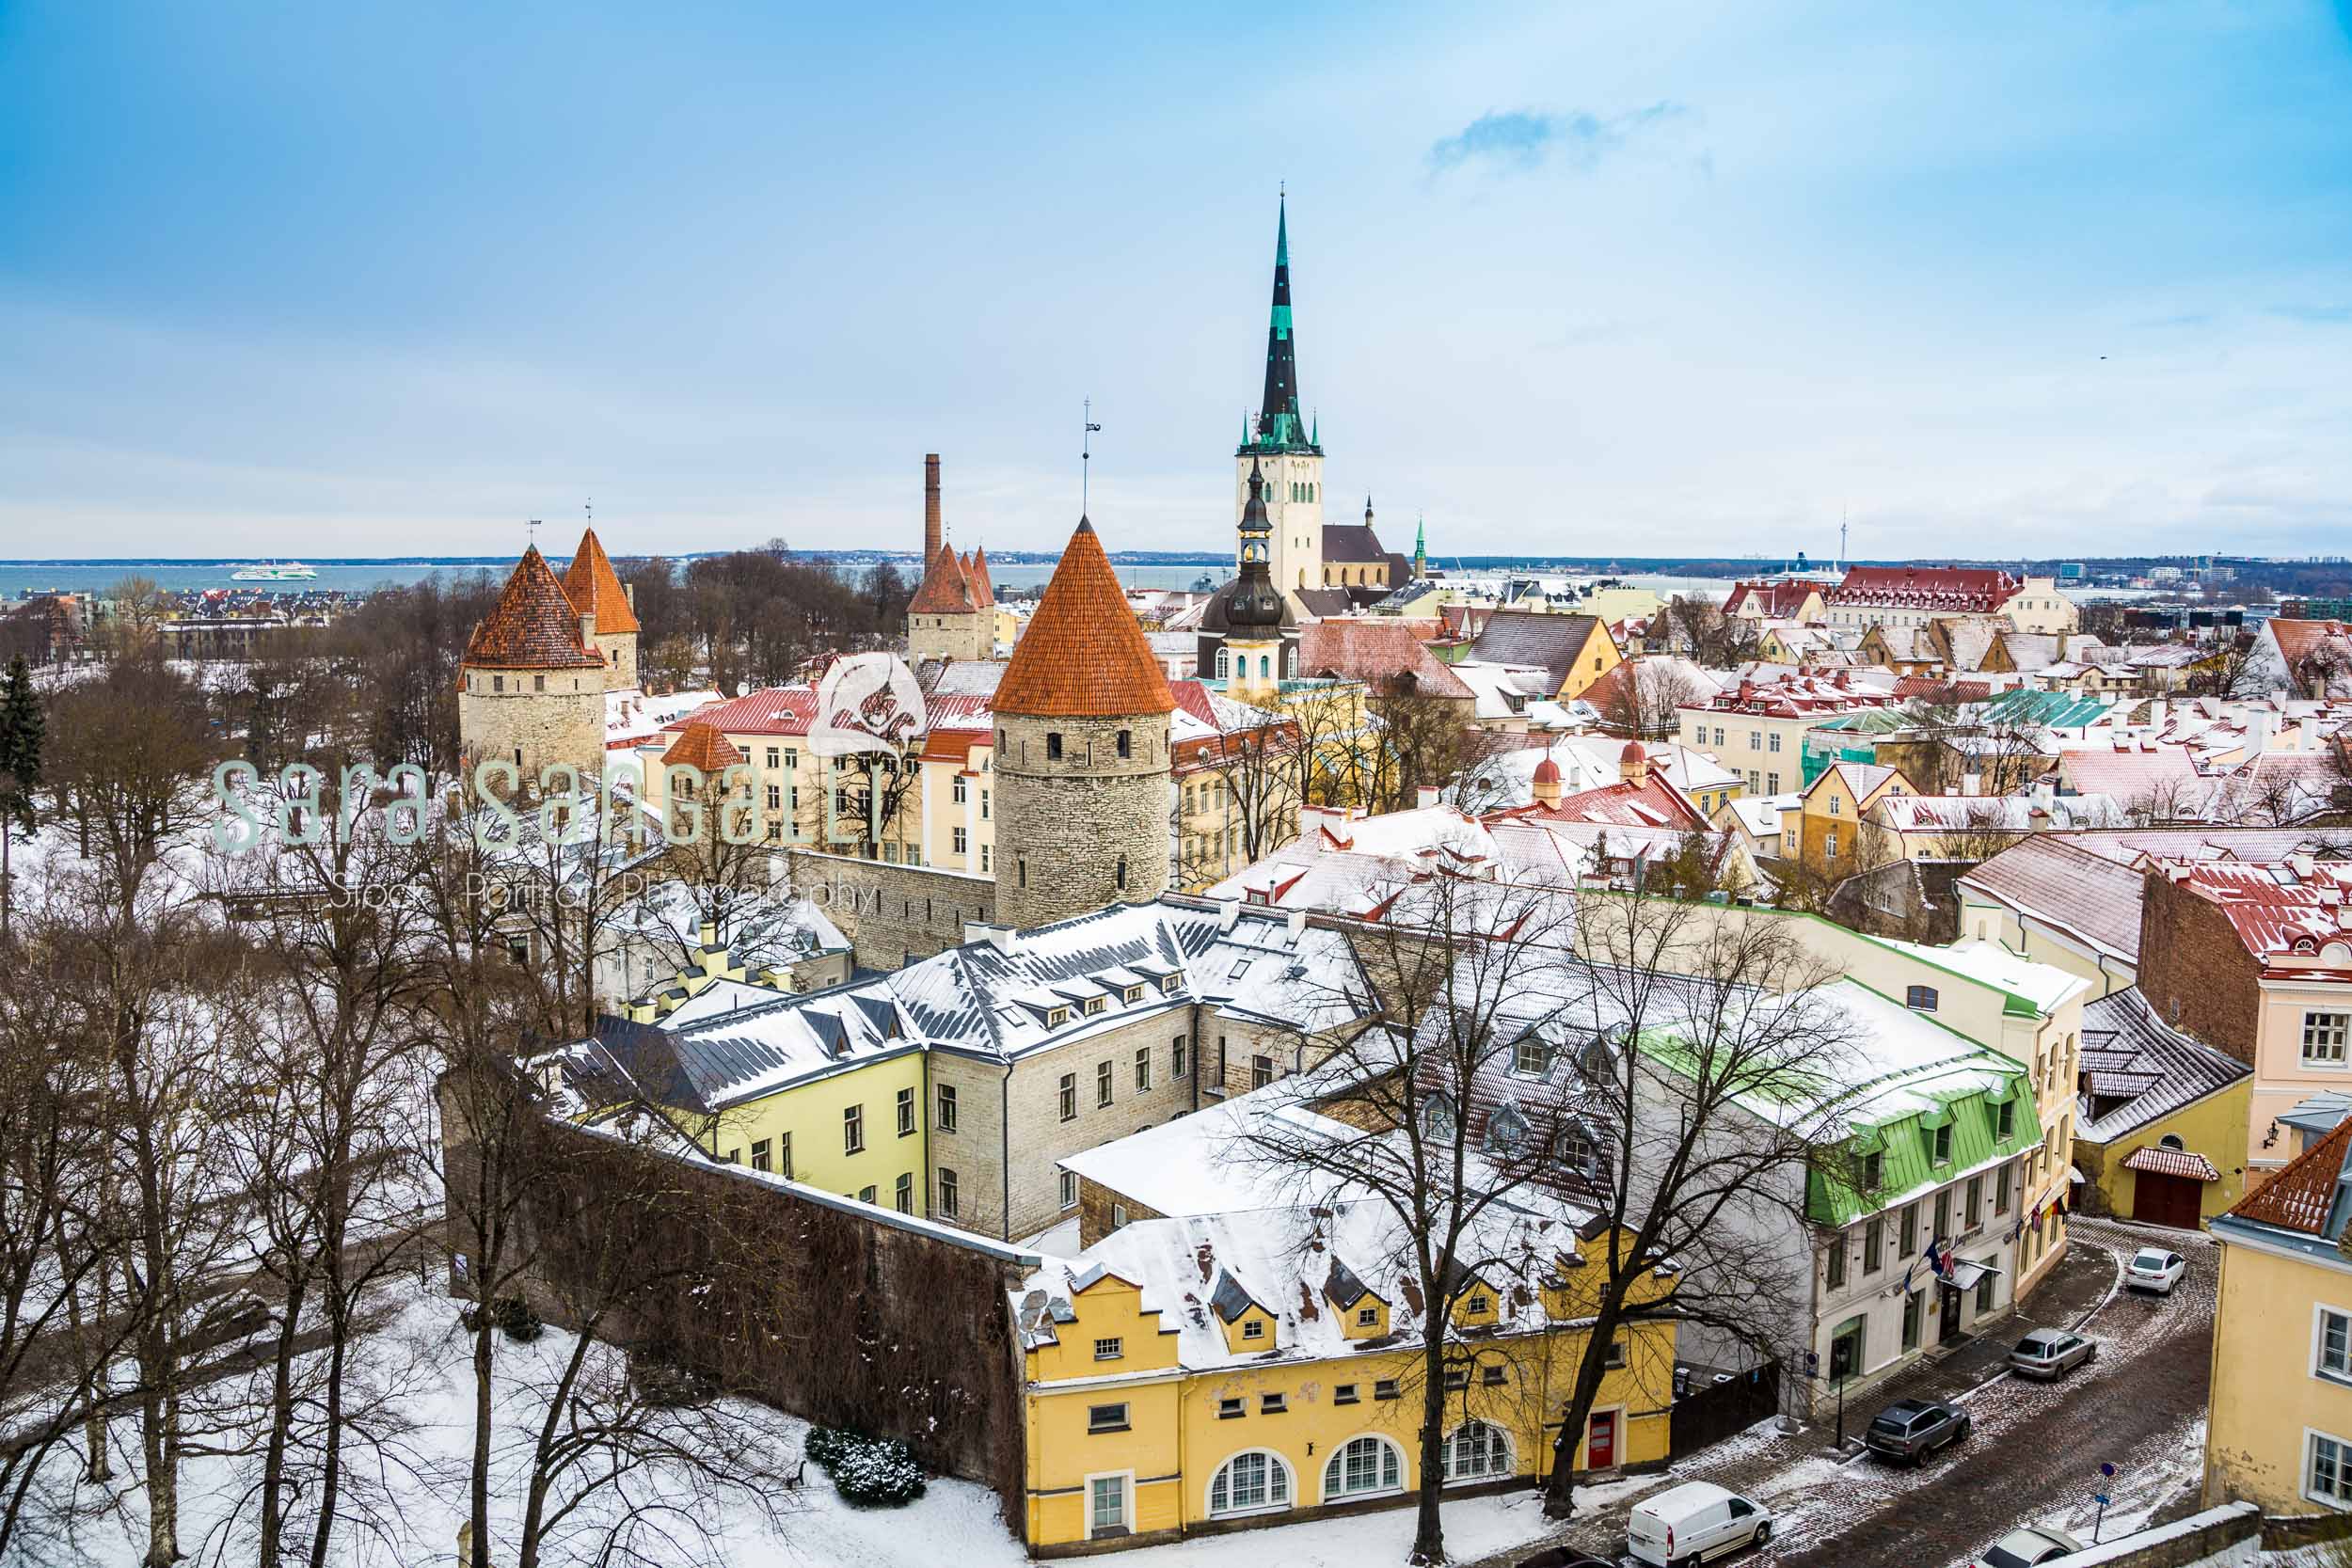 The snowy red roofs of Tallinn